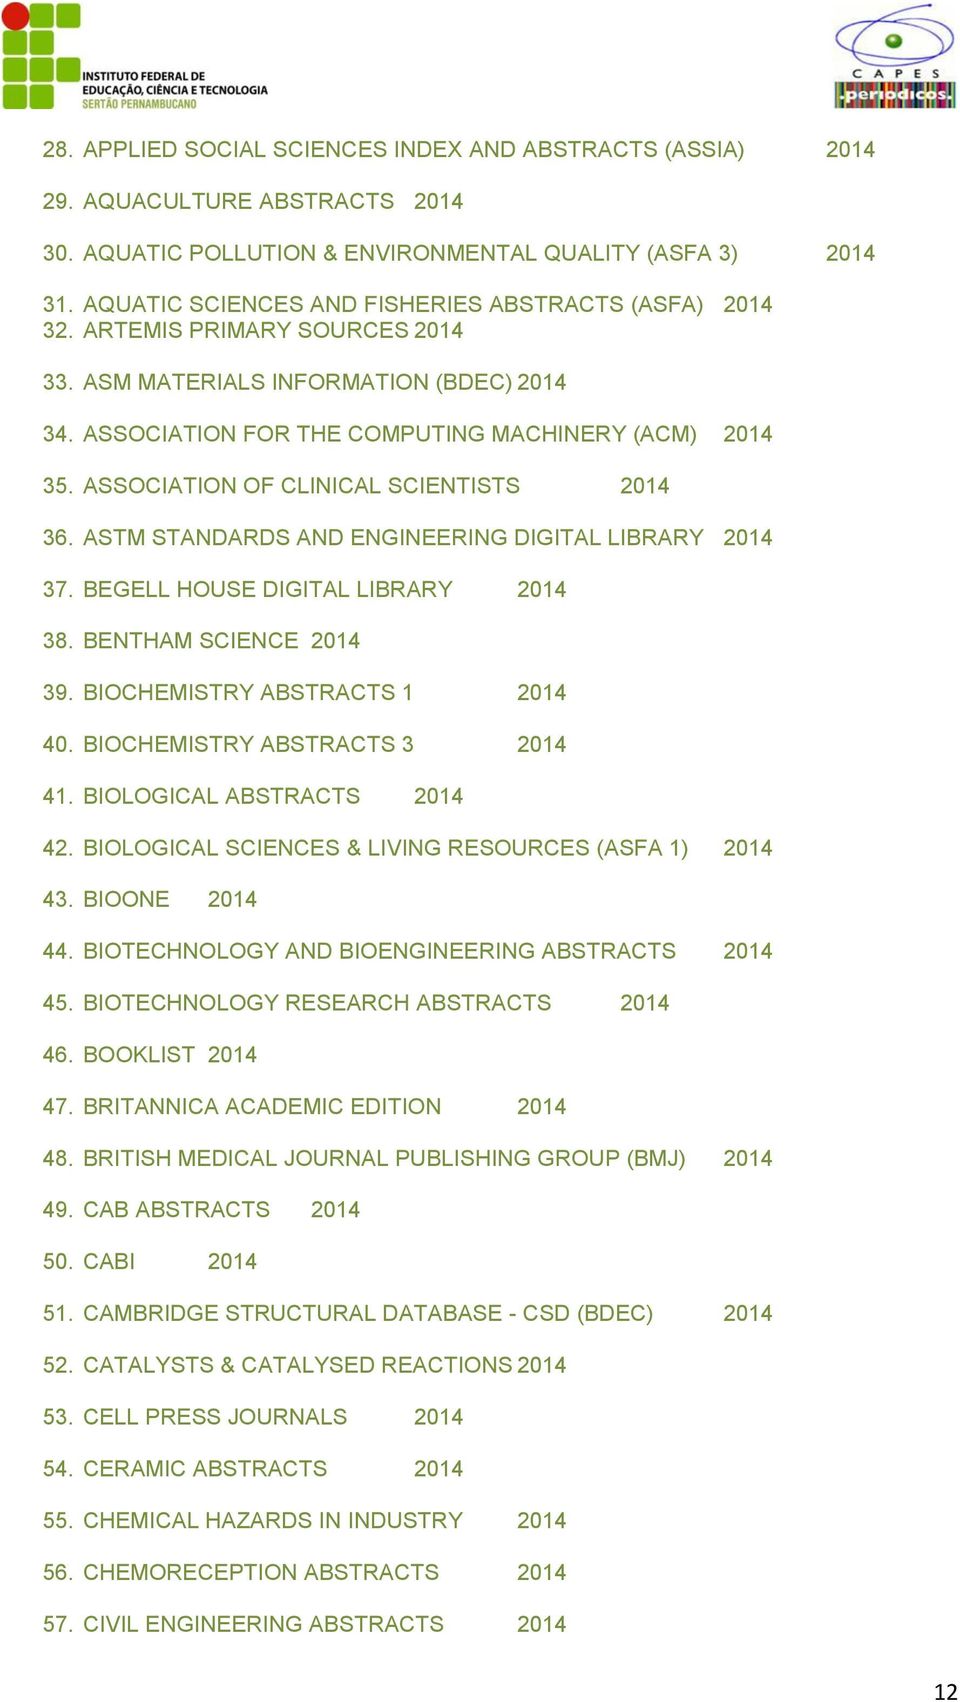 ASSOCIATION OF CLINICAL SCIENTISTS 2014 36. ASTM STANDARDS AND ENGINEERING DIGITAL LIBRARY 2014 37. BEGELL HOUSE DIGITAL LIBRARY 2014 38. BENTHAM SCIENCE 2014 39. BIOCHEMISTRY ABSTRACTS 1 2014 40.